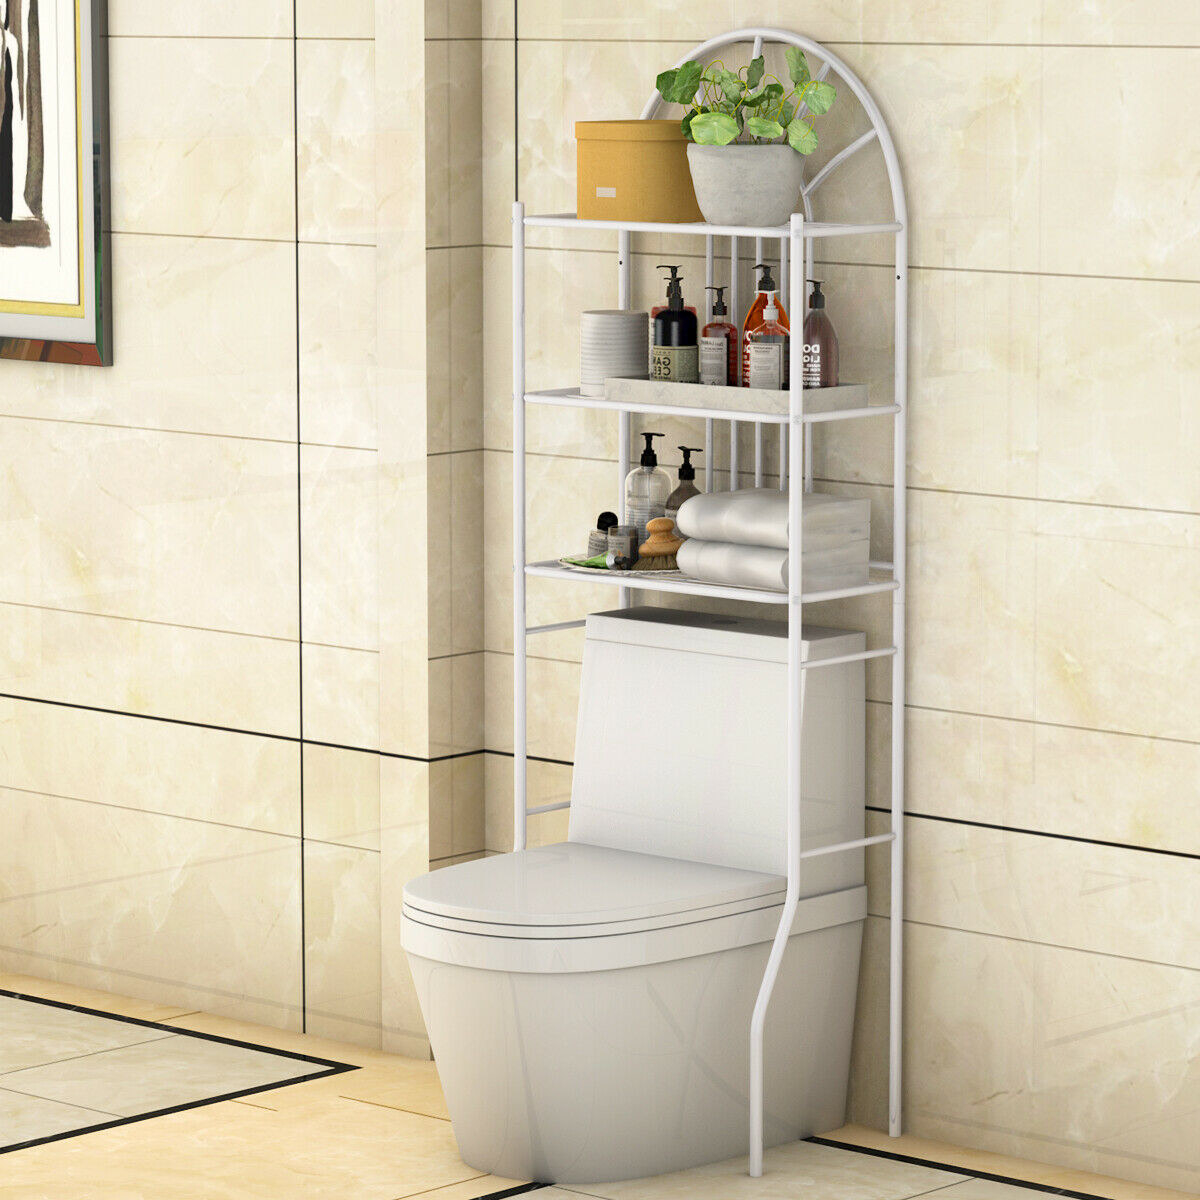 Over-the-toilet storage rack with shelves holding towels, plants, and toiletries in a bathroom